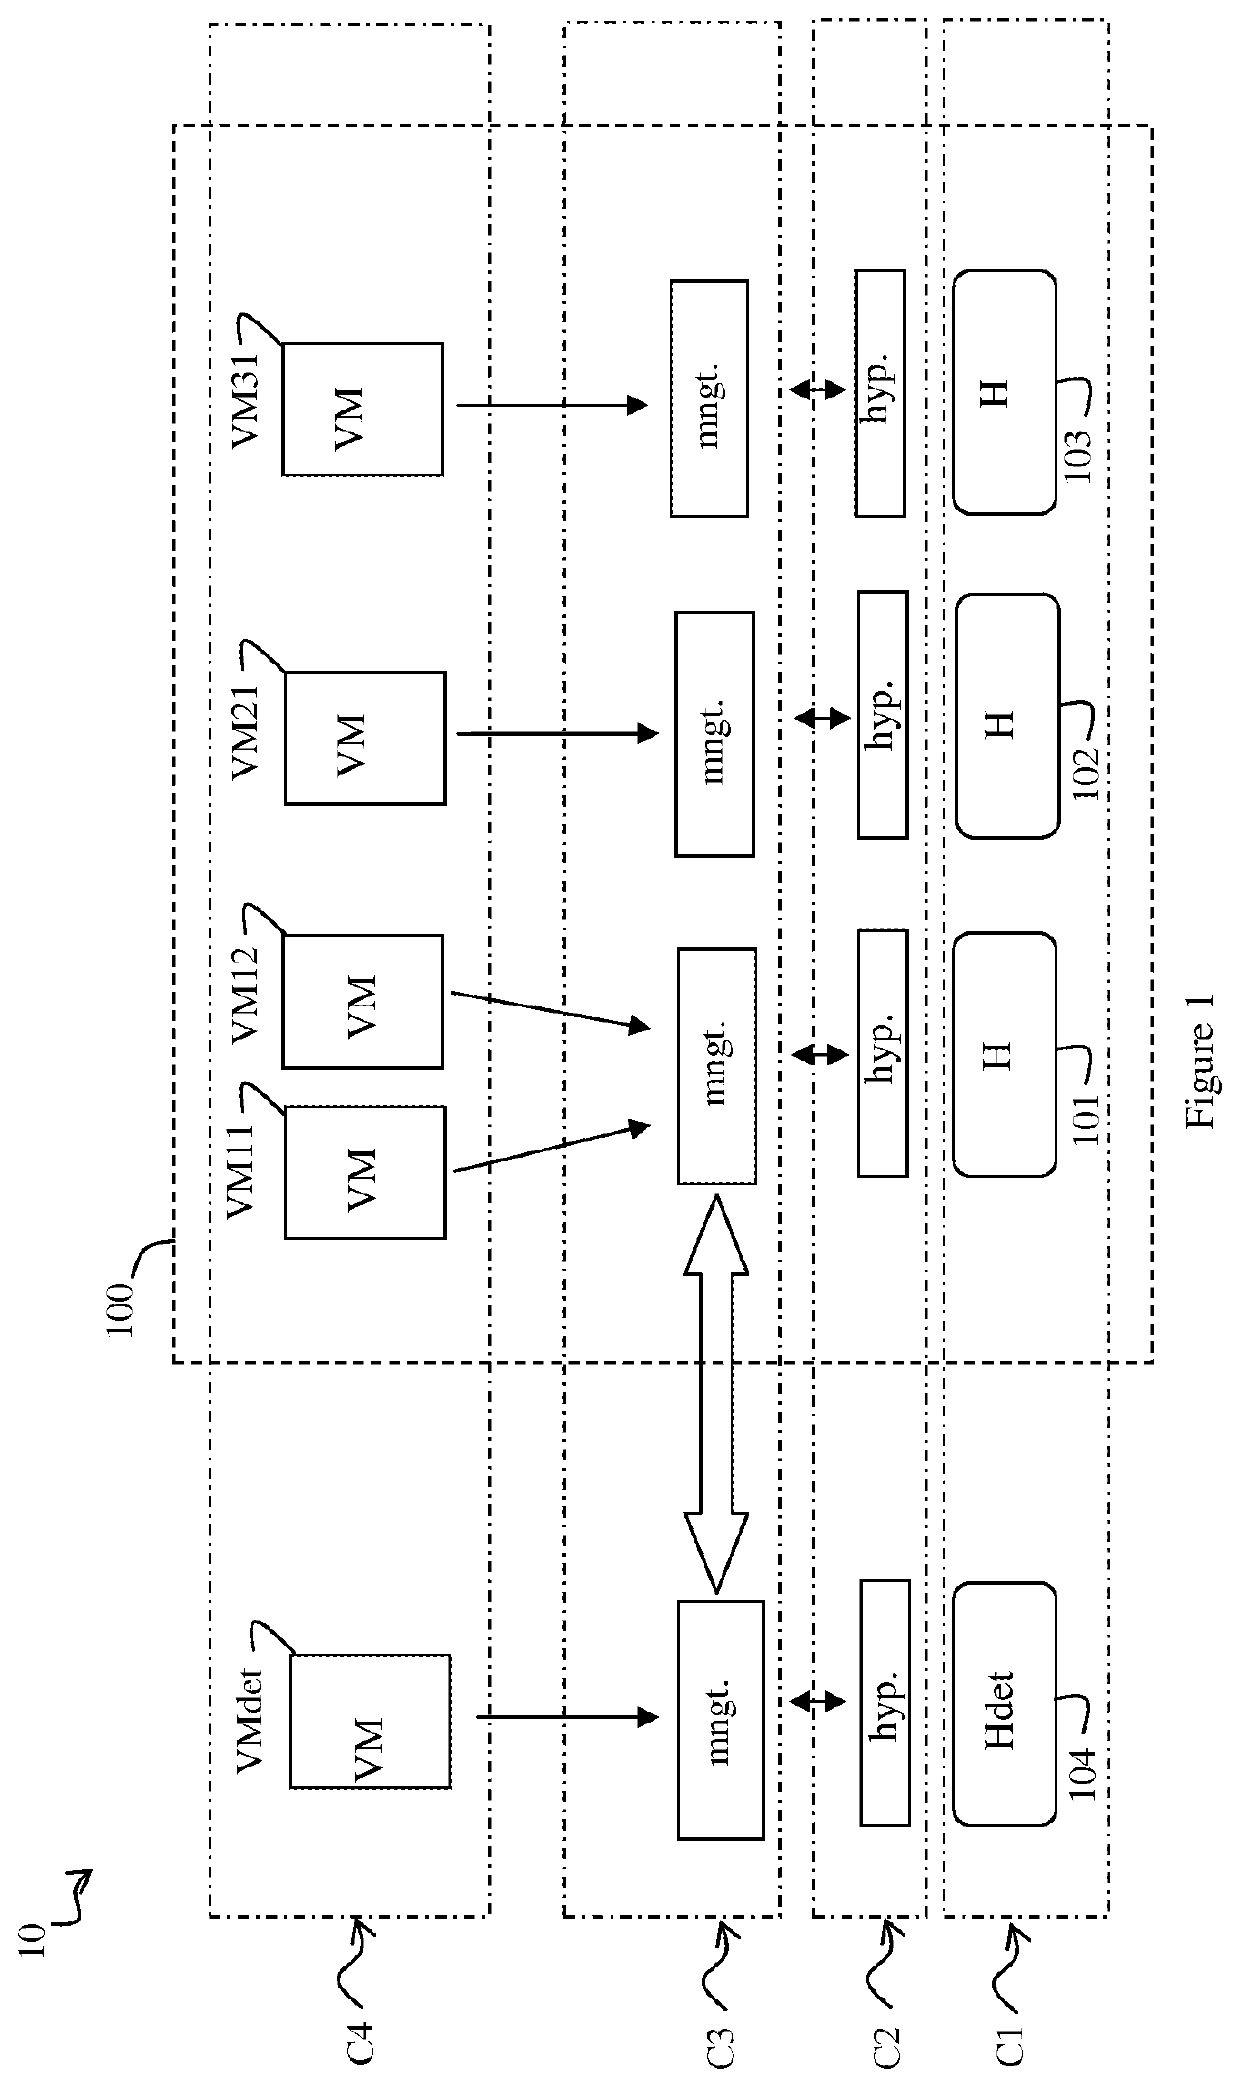 Method of detecting attacks in a cloud computing architecture